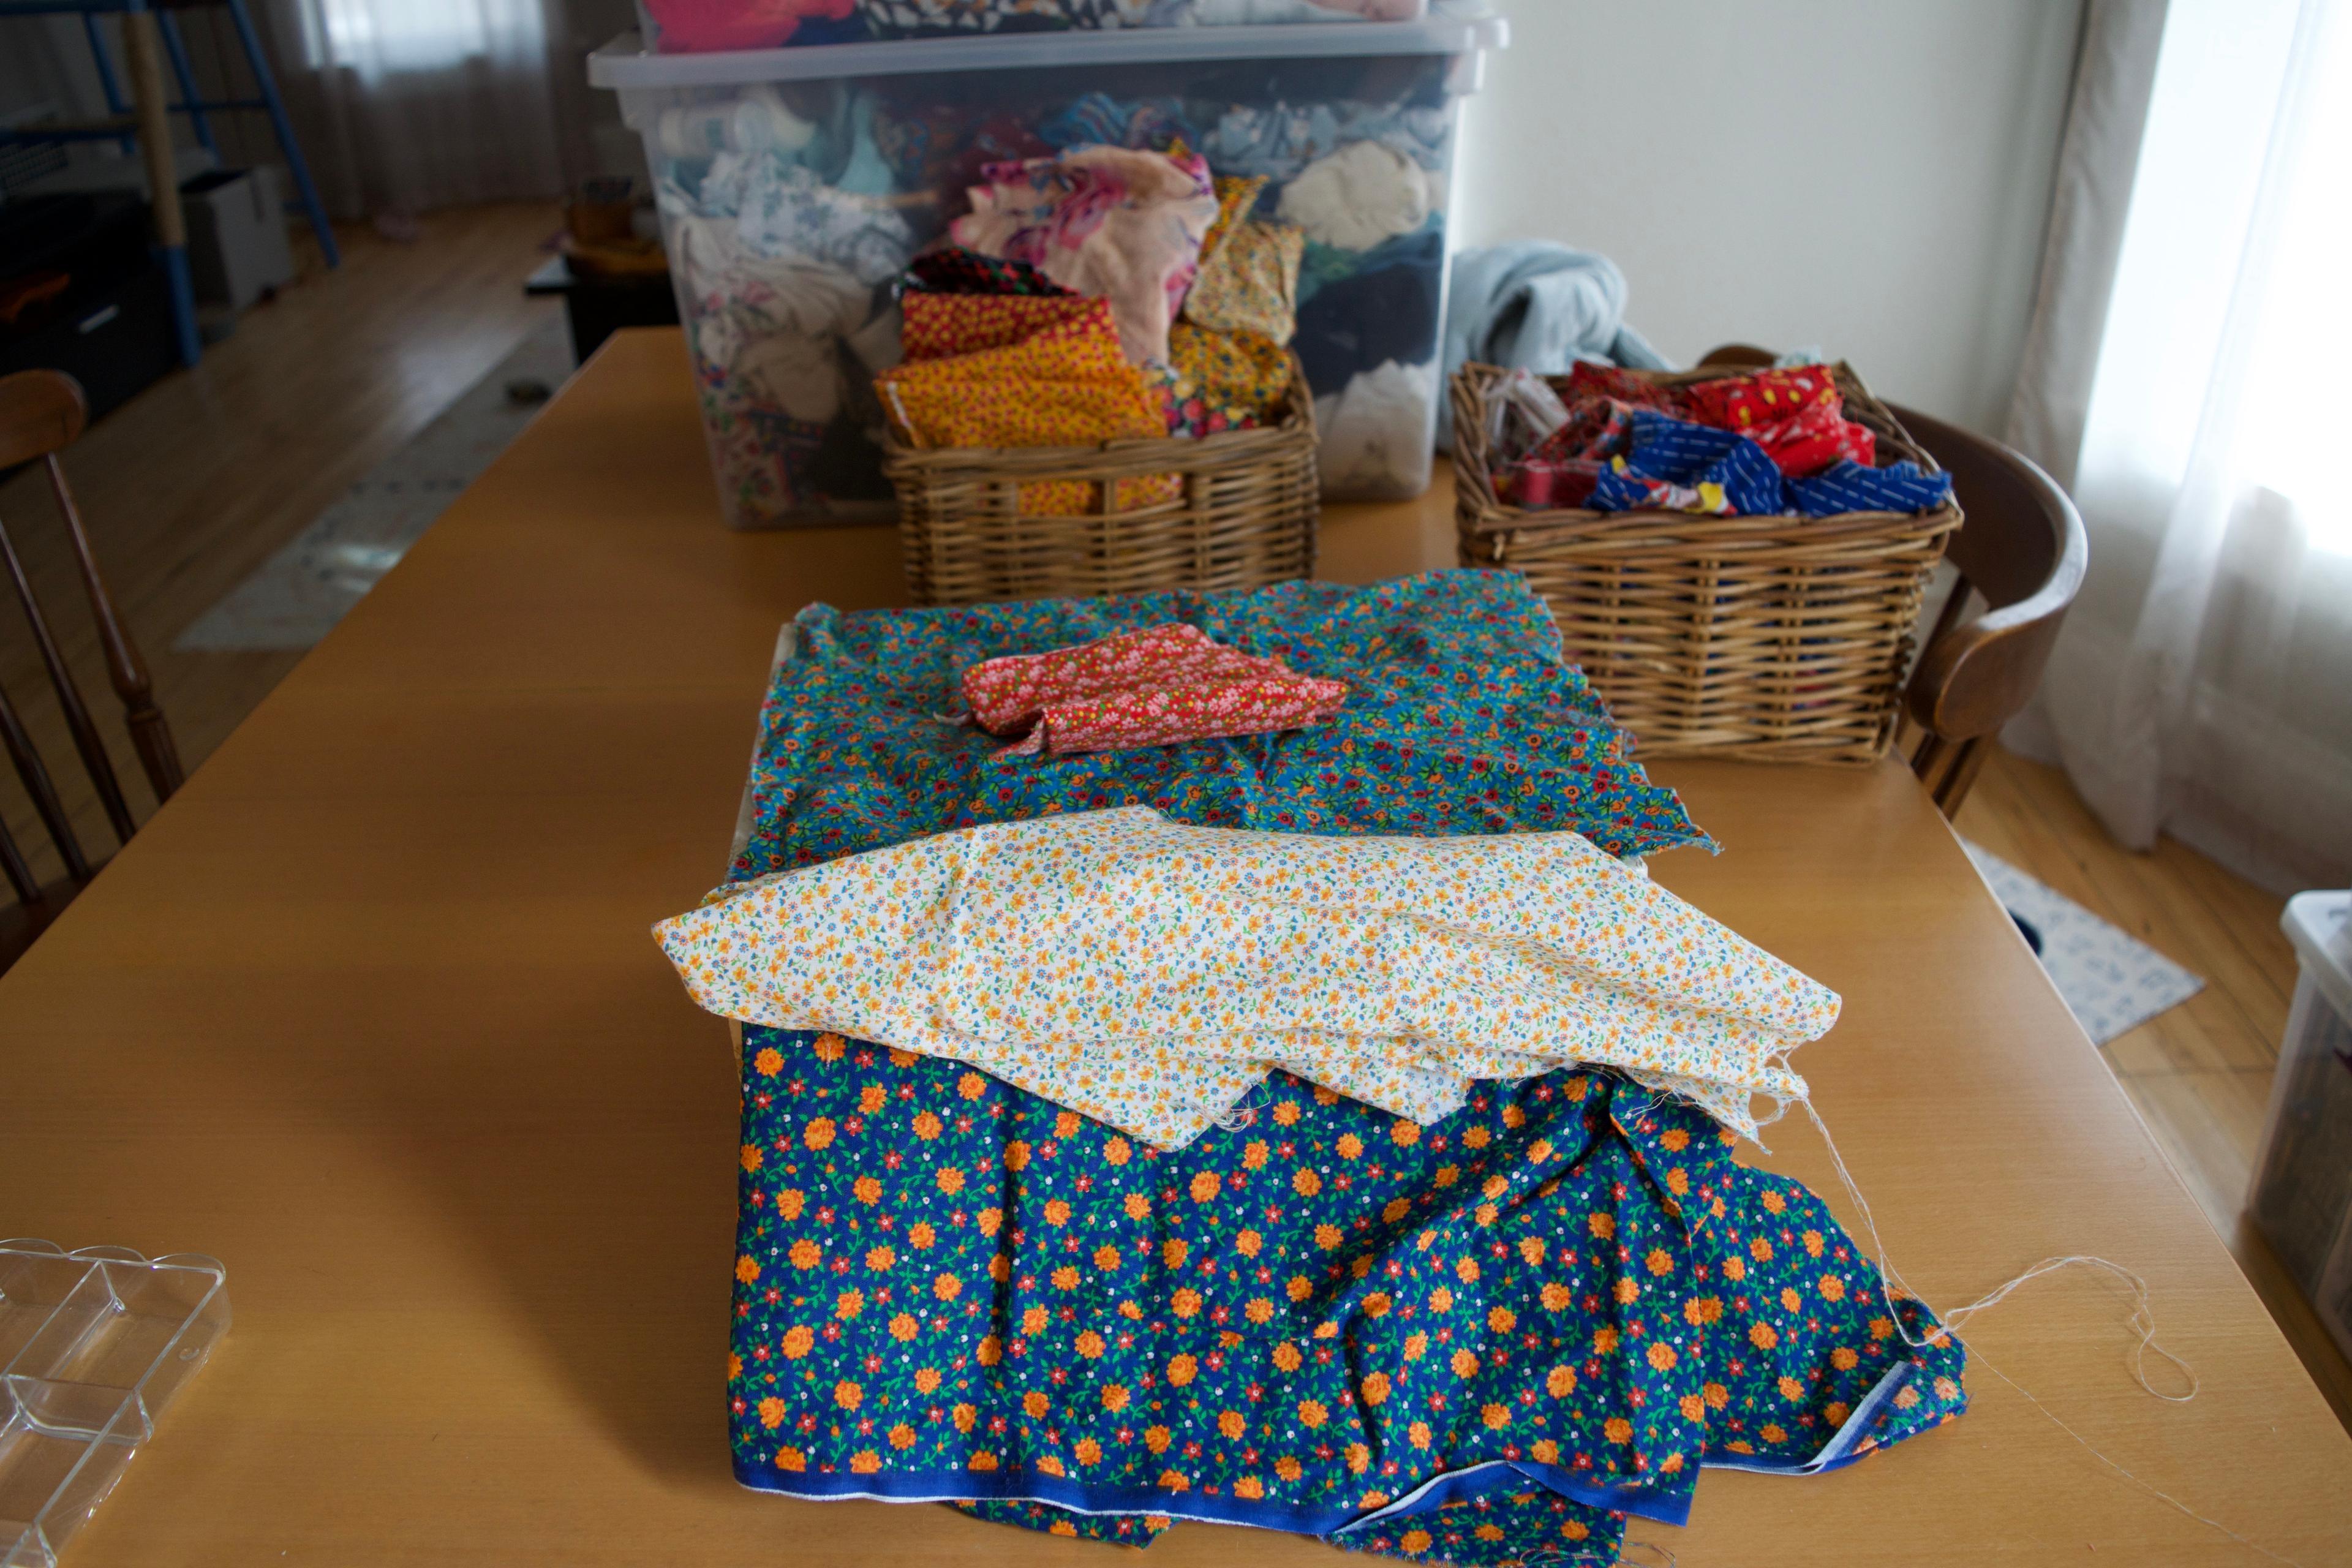 A selction of blue, white and red fabrics laying on the sewing box. There are bins of fabric on the table in the background.